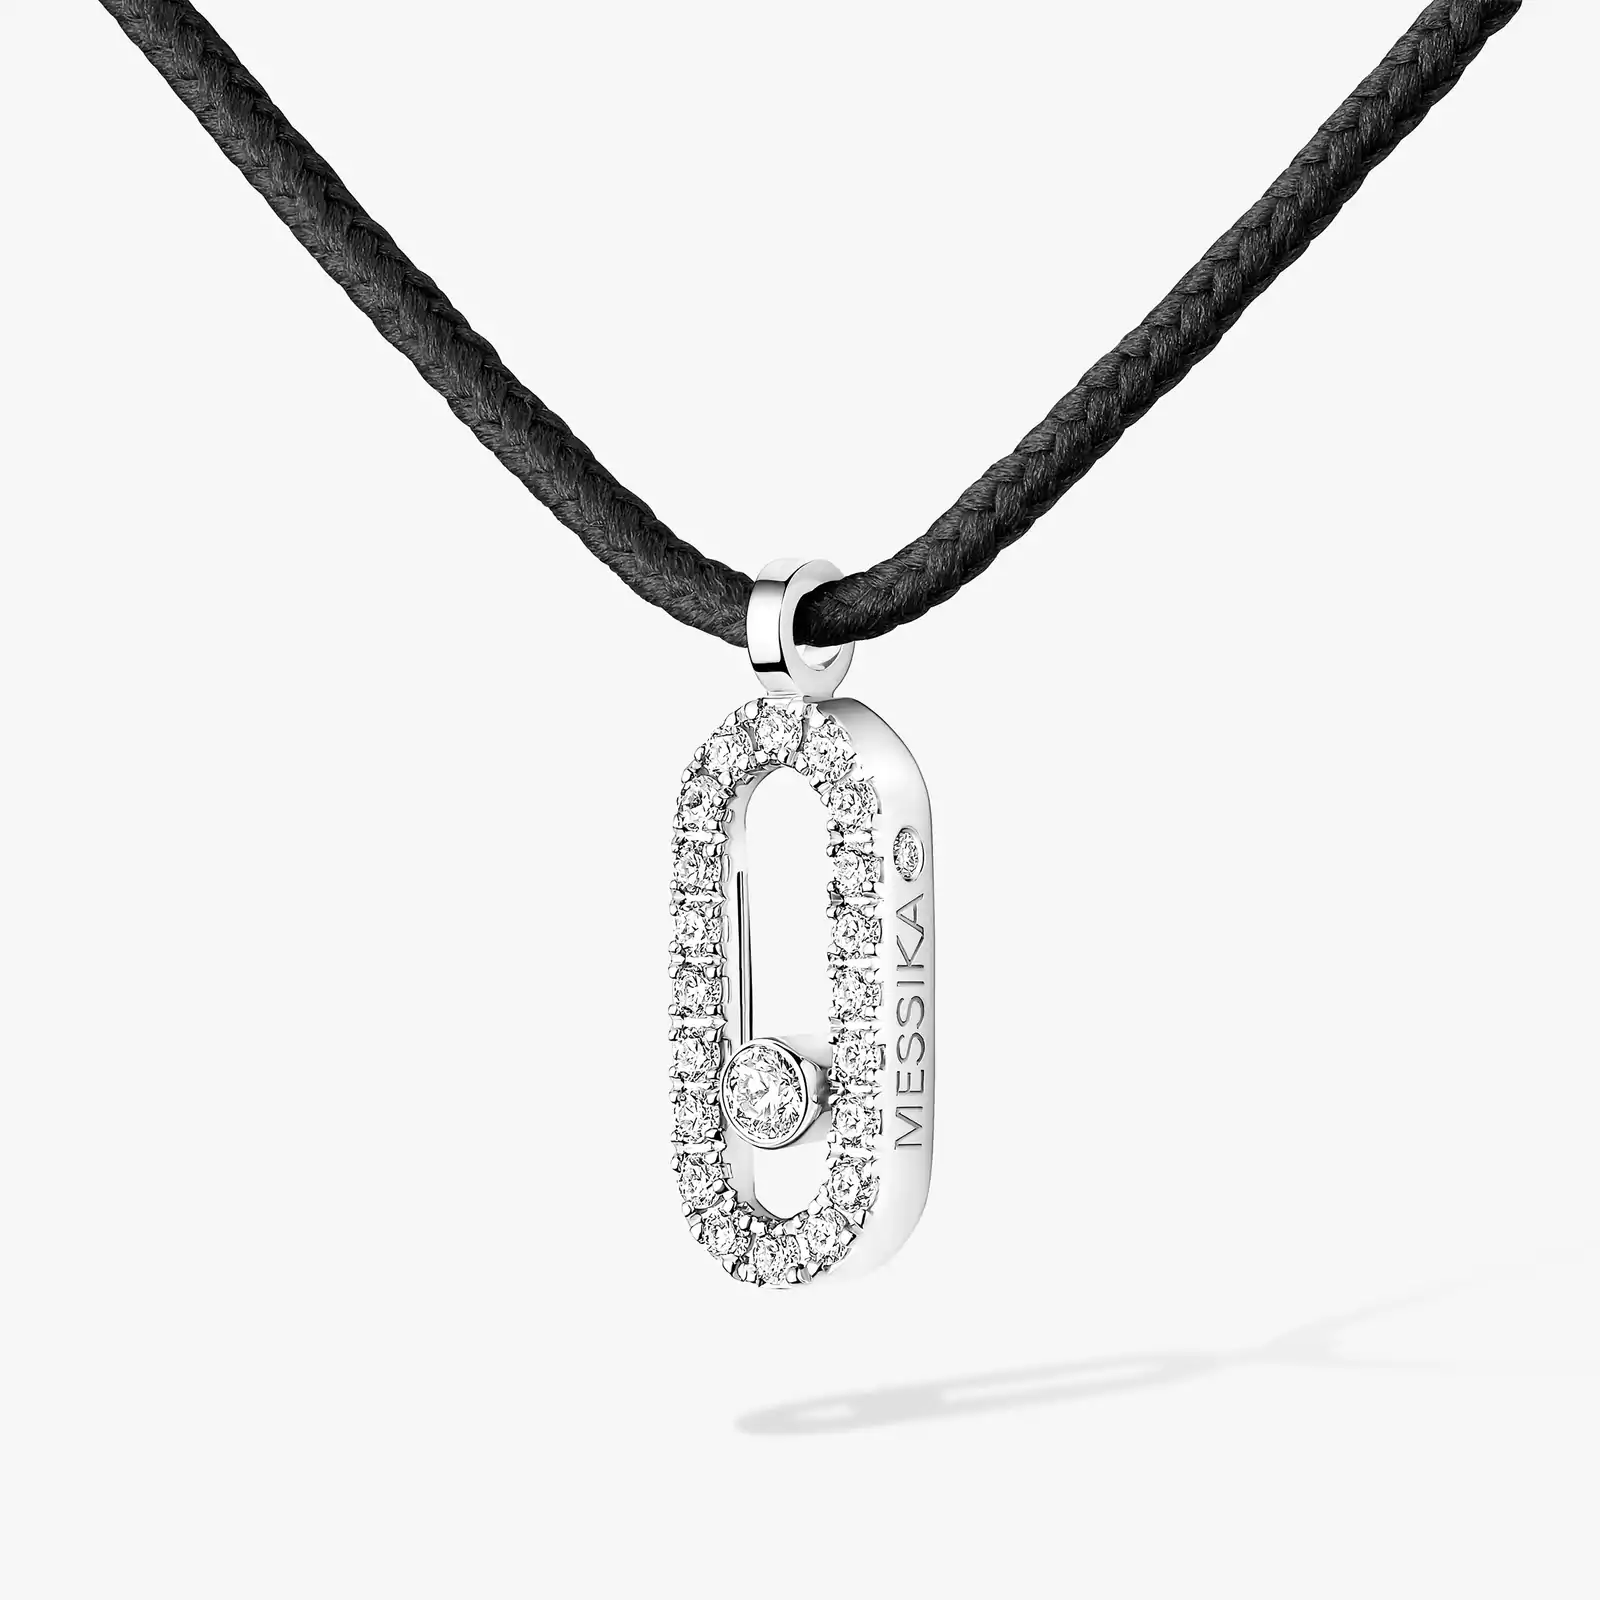 Necklace For Her White Gold Diamond Messika CARE(S) Black Cord Pavé Necklace 14142-WG